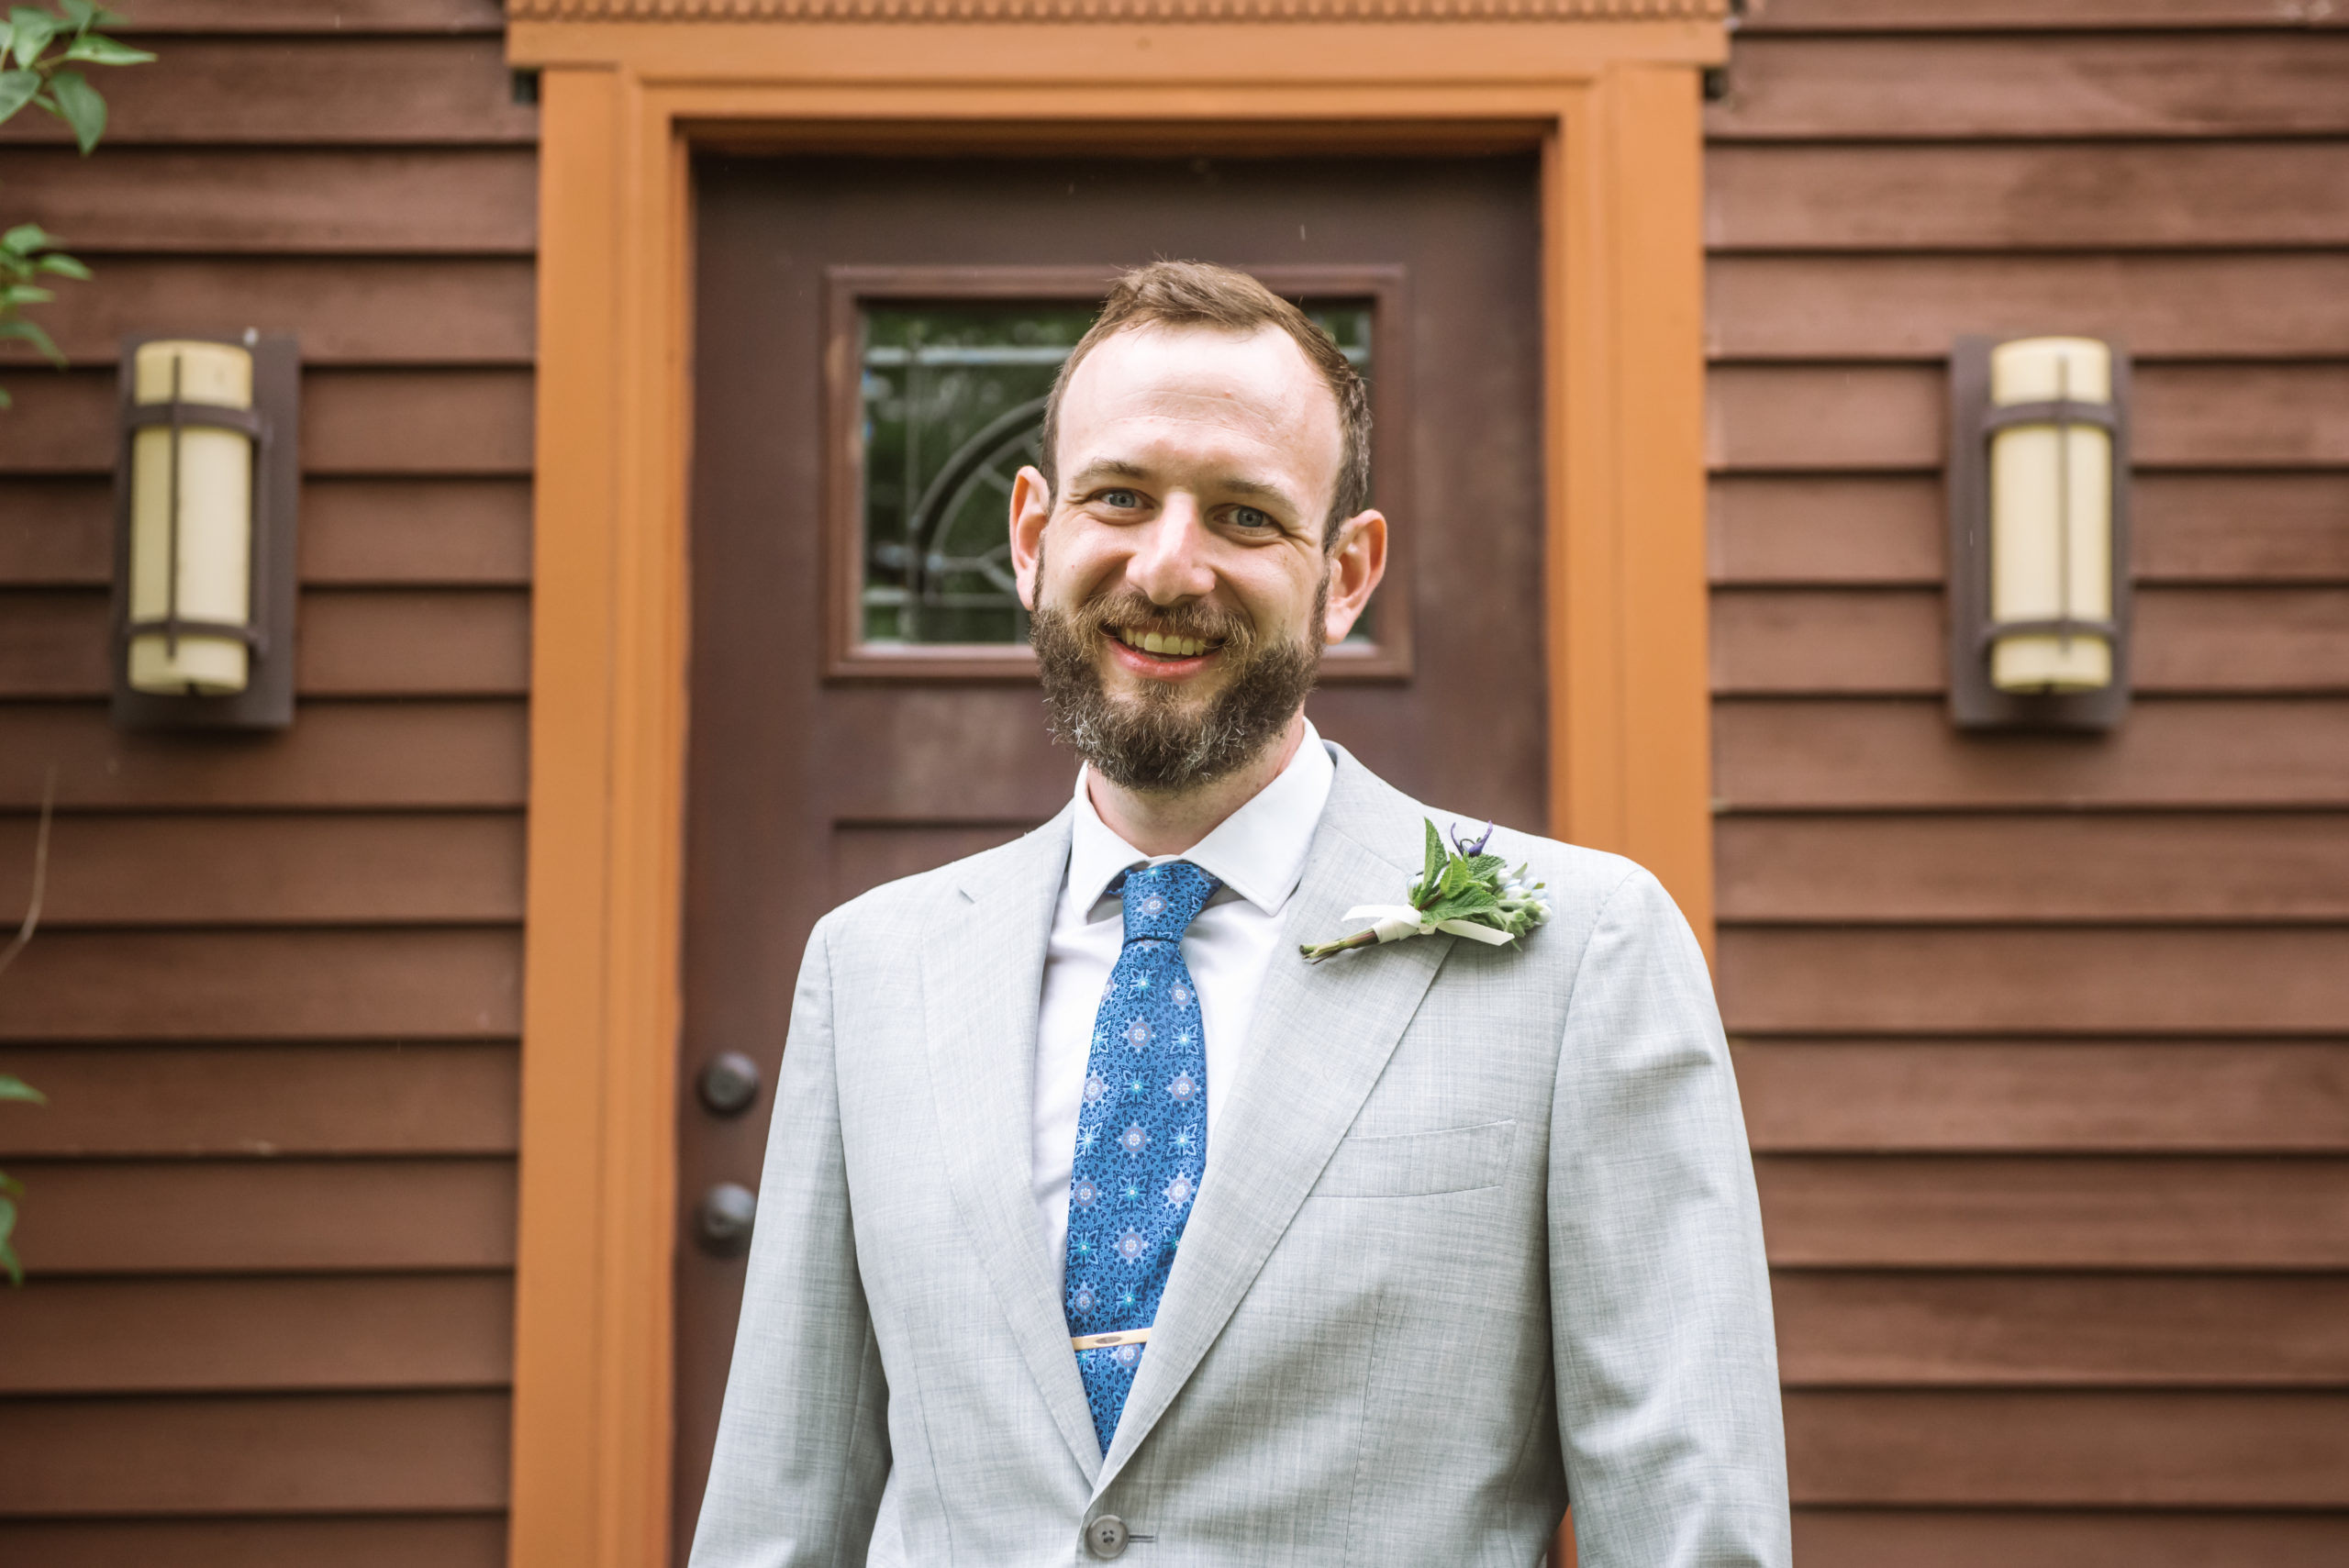 Groom wearing a light grey suit, blue patterned tie, gold tie clip, white collared shirt, and a boutonniere looking straight to camera and is smiling. He is standing in front of a dark red wood house's front door with greenery and trees surrounding the facade.